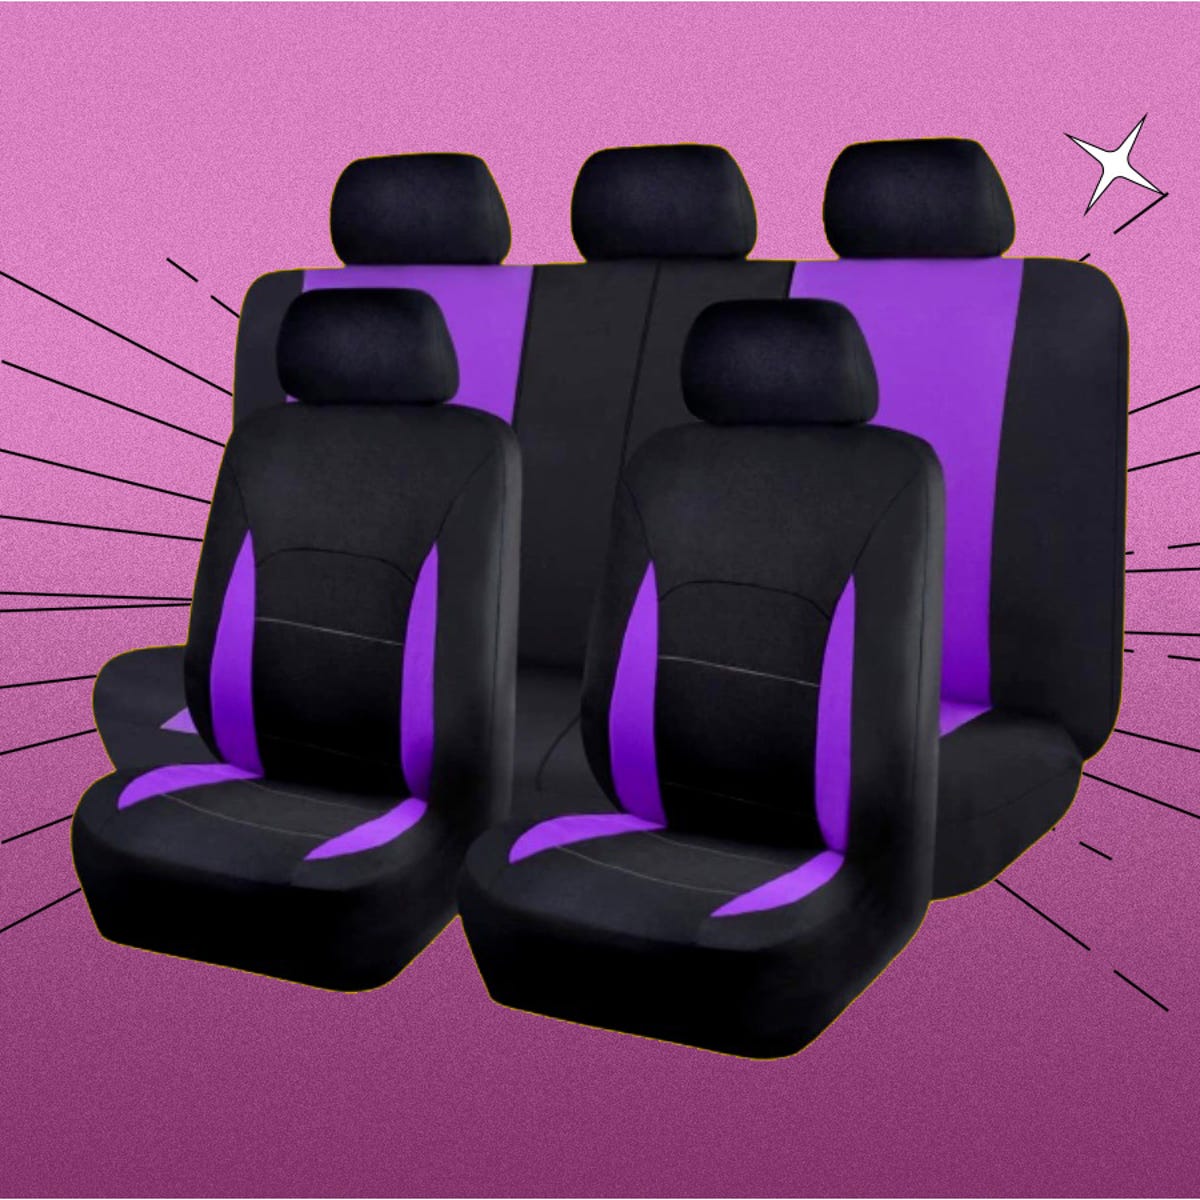 Best Car Seat Cover Deals: Prices Start at $29 - CNET